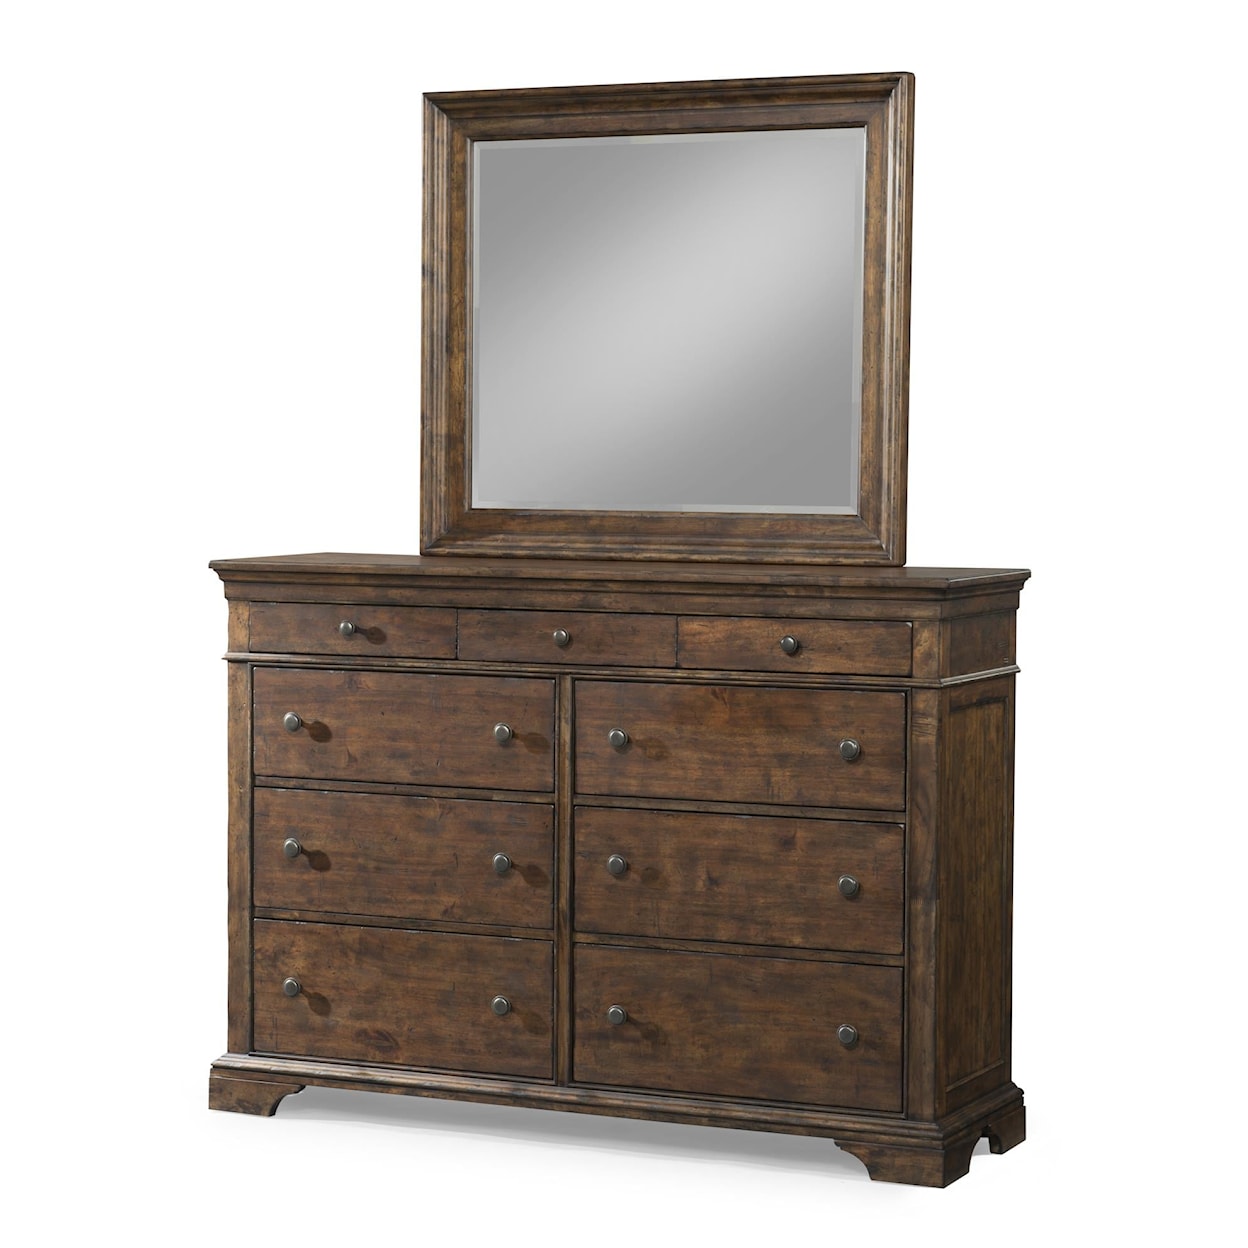 Trisha Yearwood Home Collection by Legacy Classic Trisha Yearwood Home Dresser and Mirror